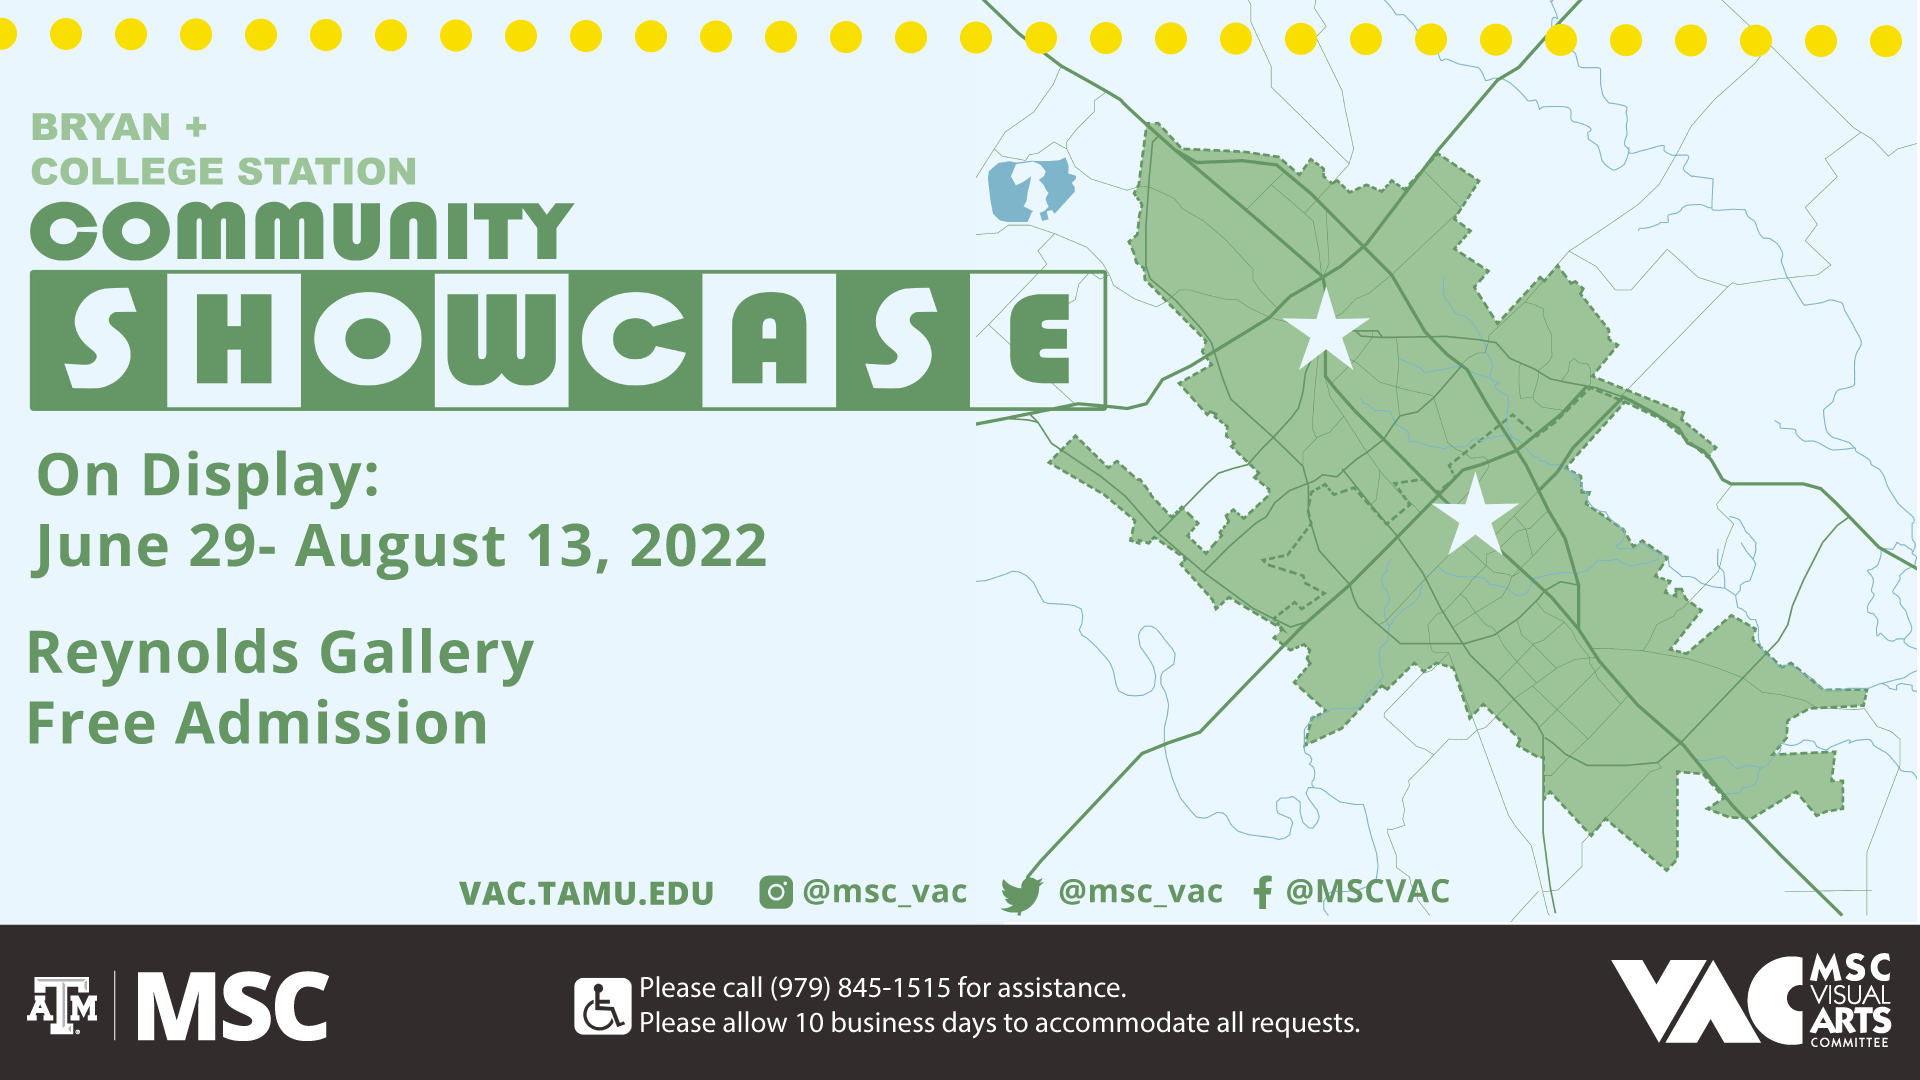 MSC VAC Presents Bryan and College Station Community Showcase, On display: June 29-August 13, 2022 at the Reynolds Gallery, Free admission. Website: vac.tamu.edu, Instagram: @msc_vac, Twitter: @msc_vac, Facebook: @MSCVAC Please call 979 845 1515 for assistance. Please allow 10 business days to accommodate all requests.